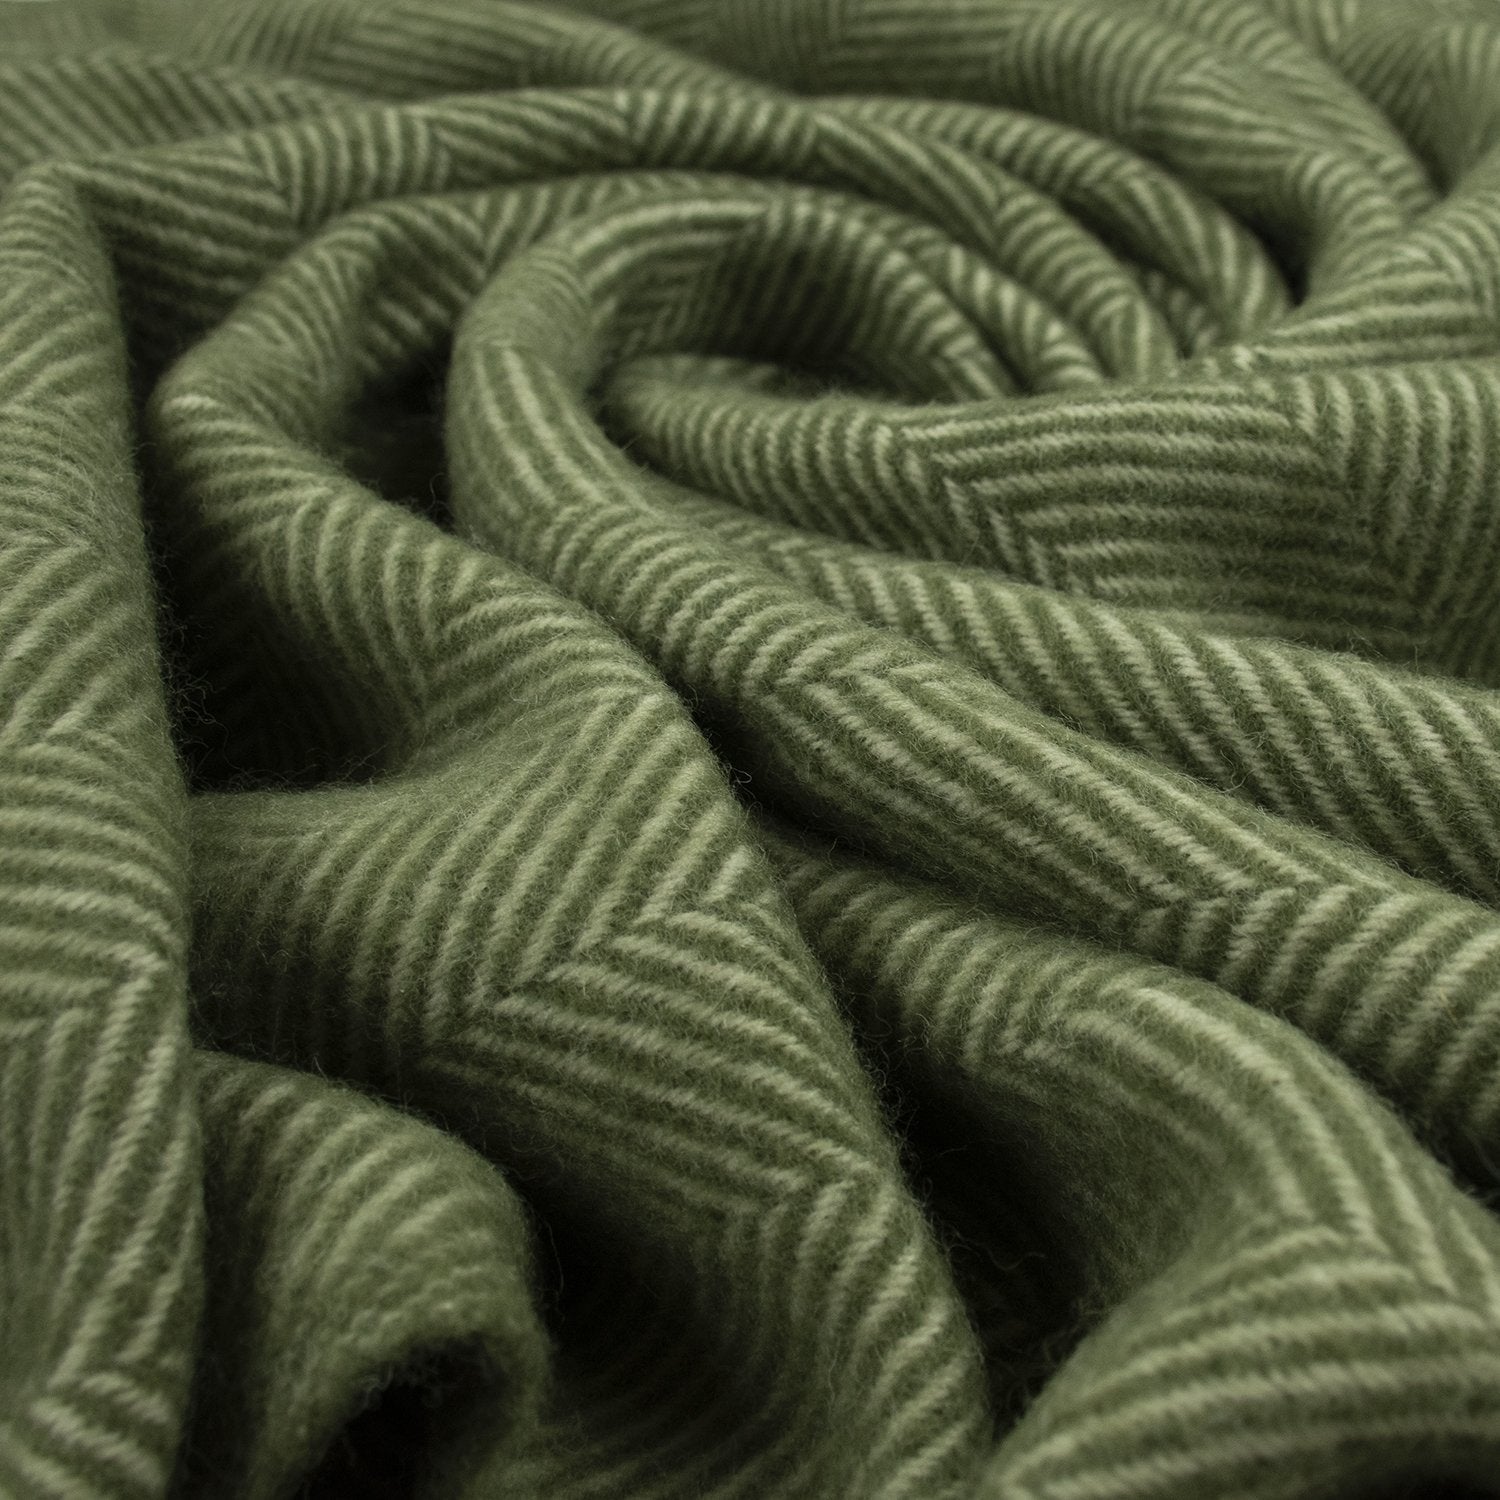 Highland Tweed Herringbone Pure New Wool Throw ~ Evergreen ~-Throws and Blankets-Prince of Scots-00810032750091-K4050030-22-Prince of Scots